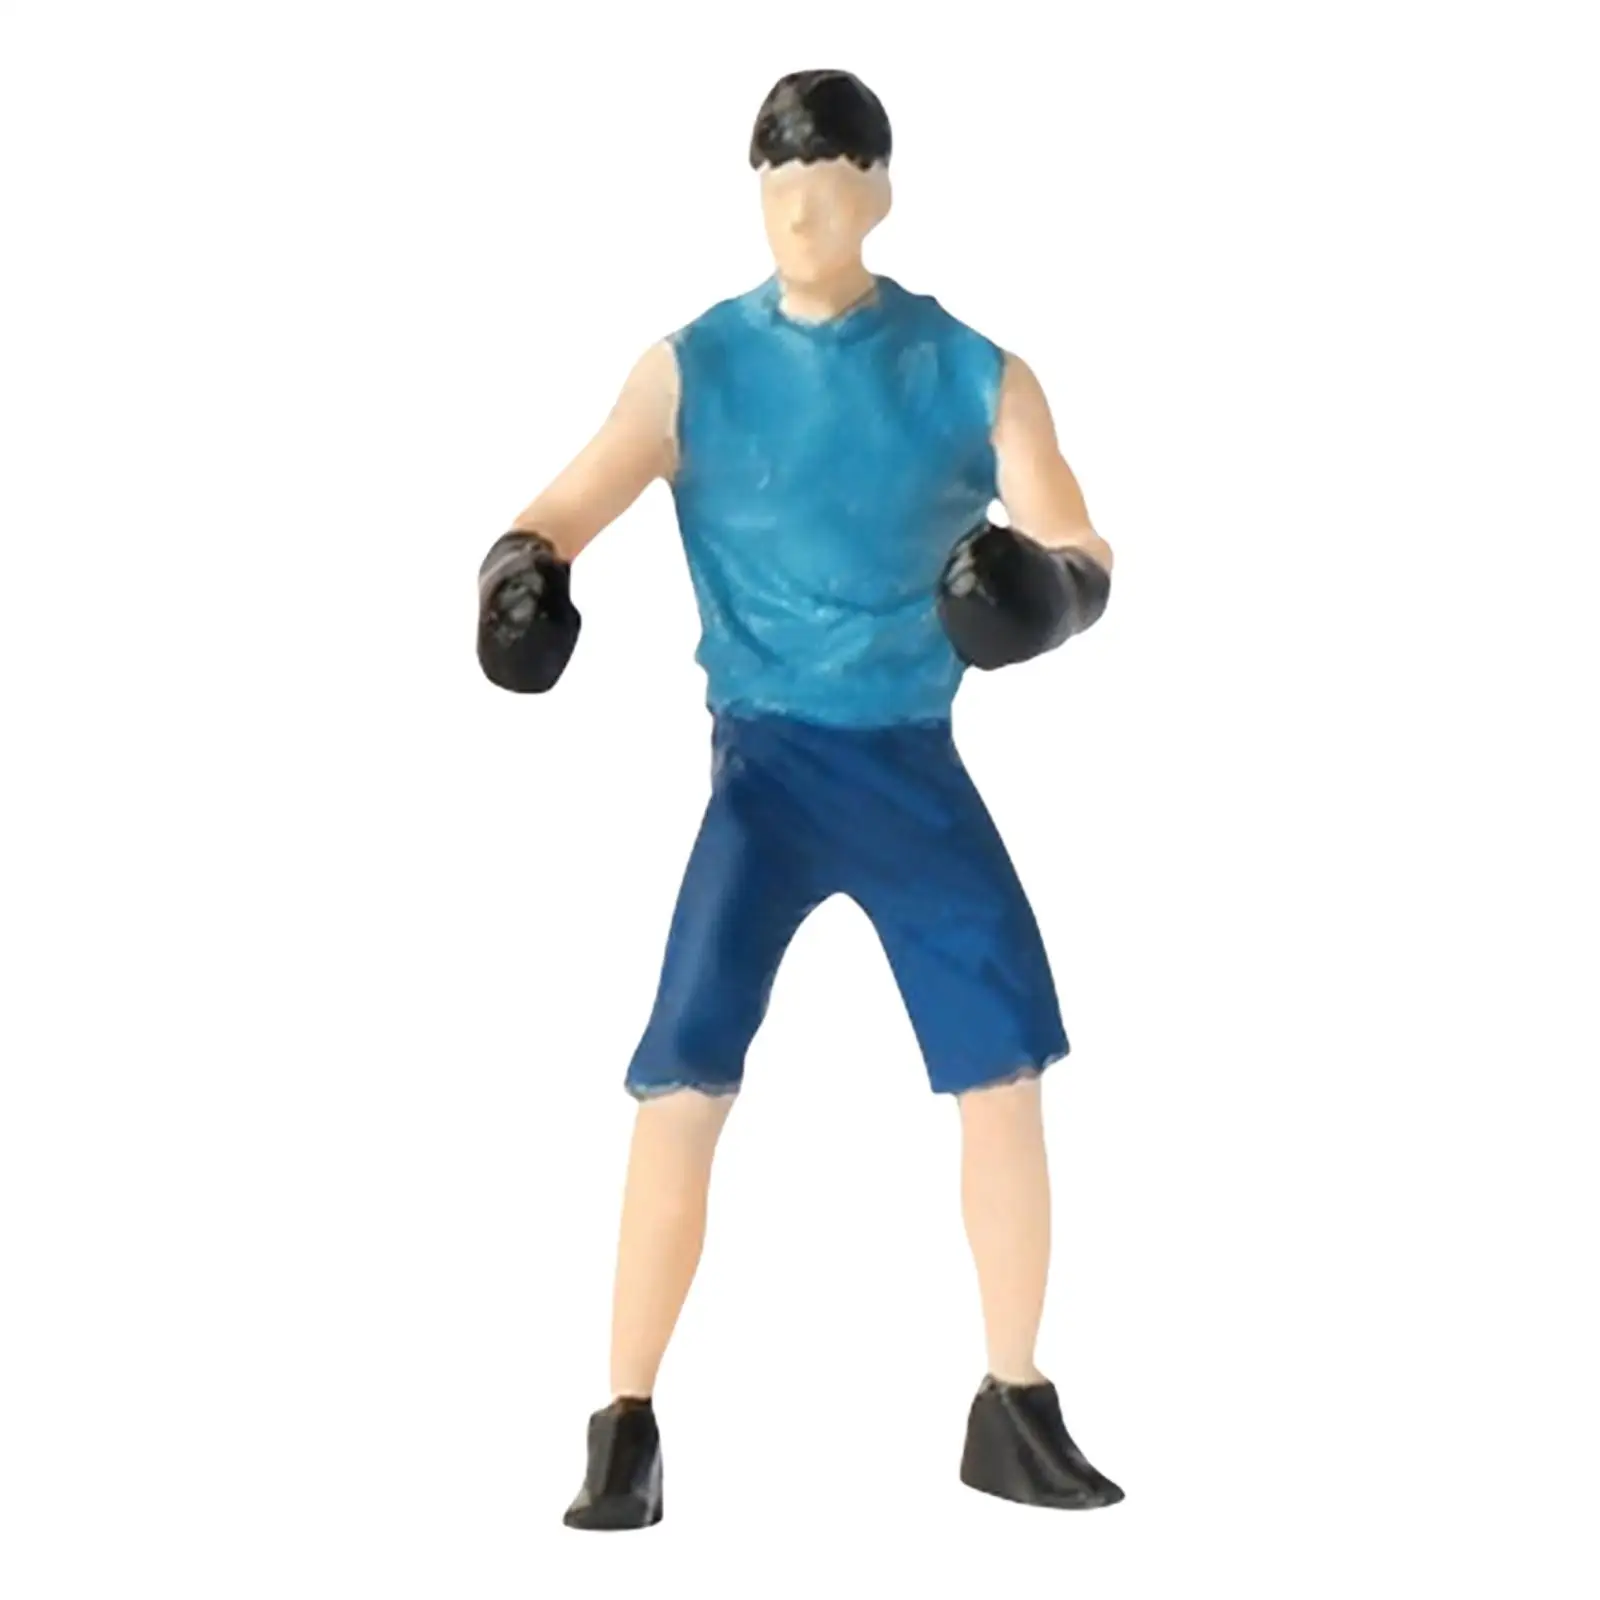 Mini 1/64 Figures Boxing Figurines Collectibles Resin Doll Hand Painted for Micro Landscapes Photography Props DIY Scene Layout